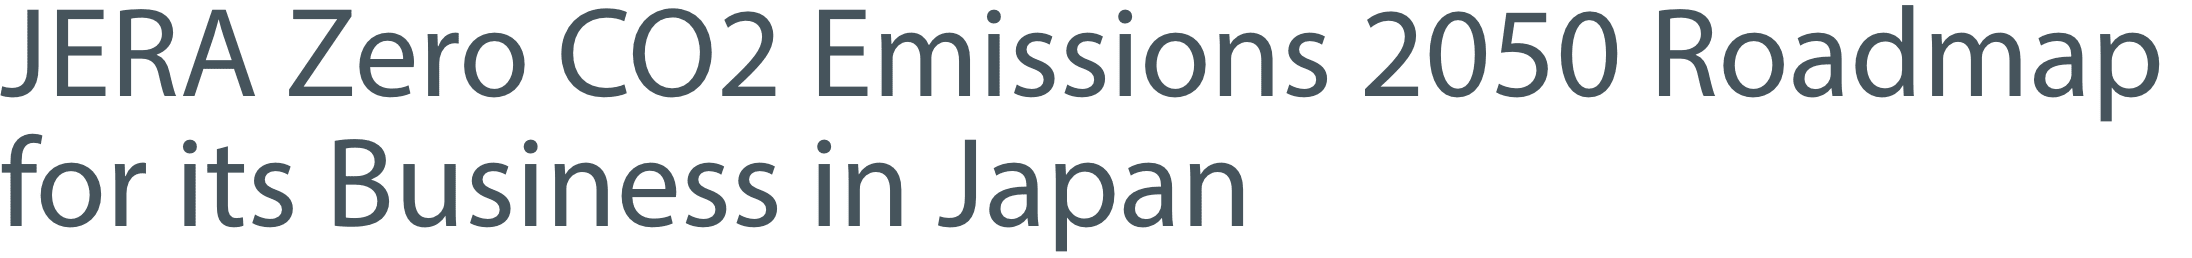 JERA Zero CO2 Emissions 2050 Roadmap for its Business in Japan